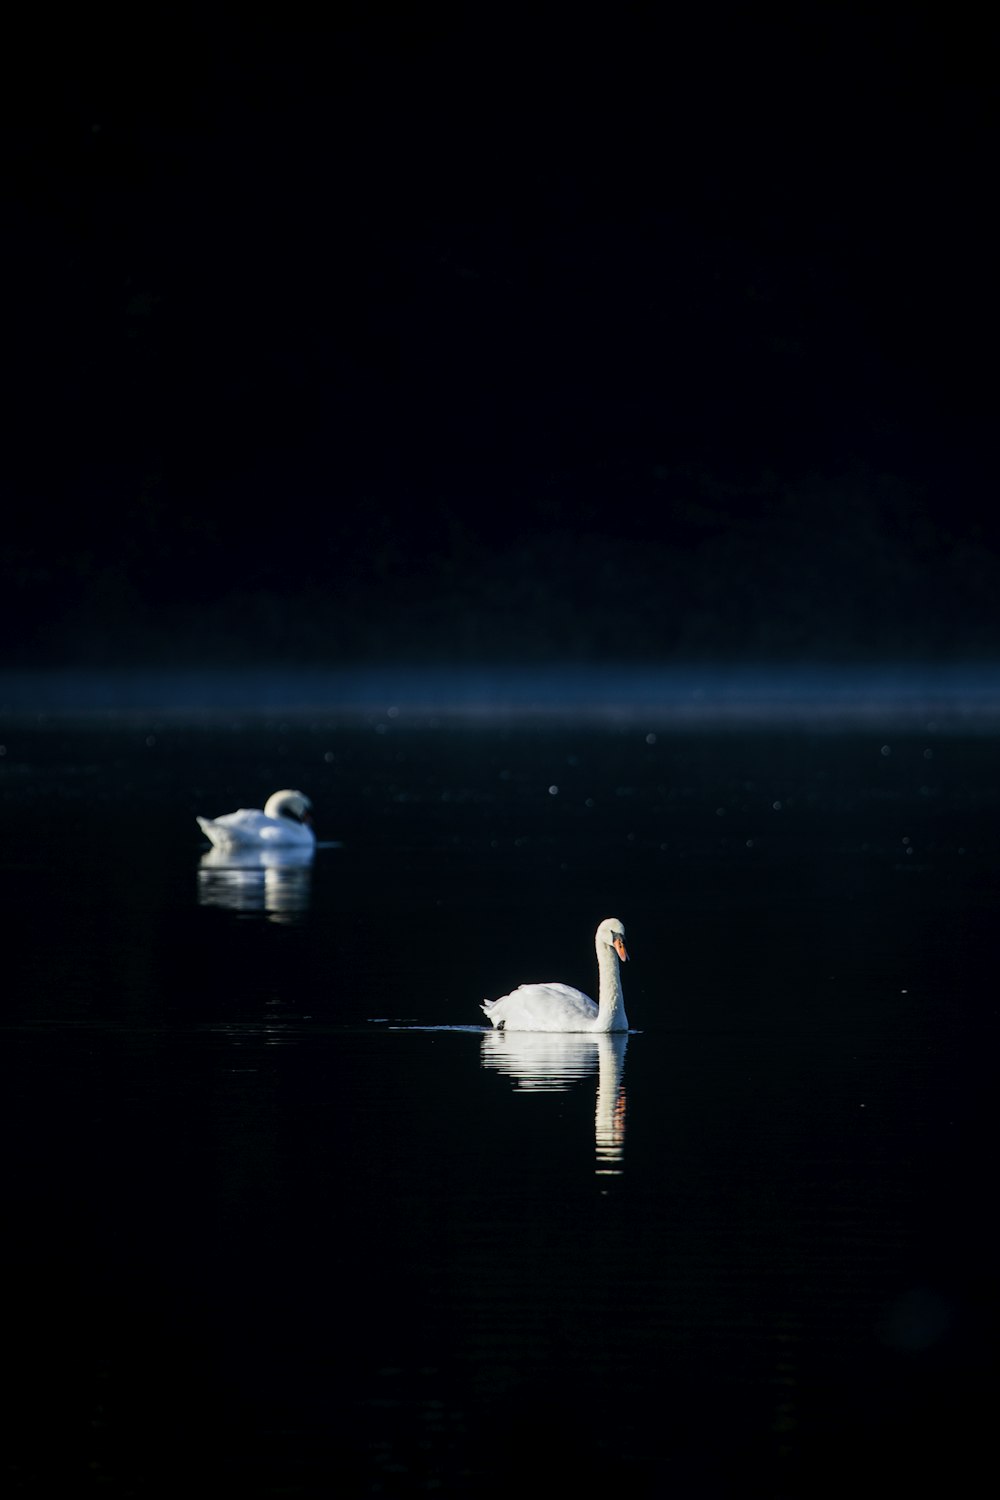 two white swans on water